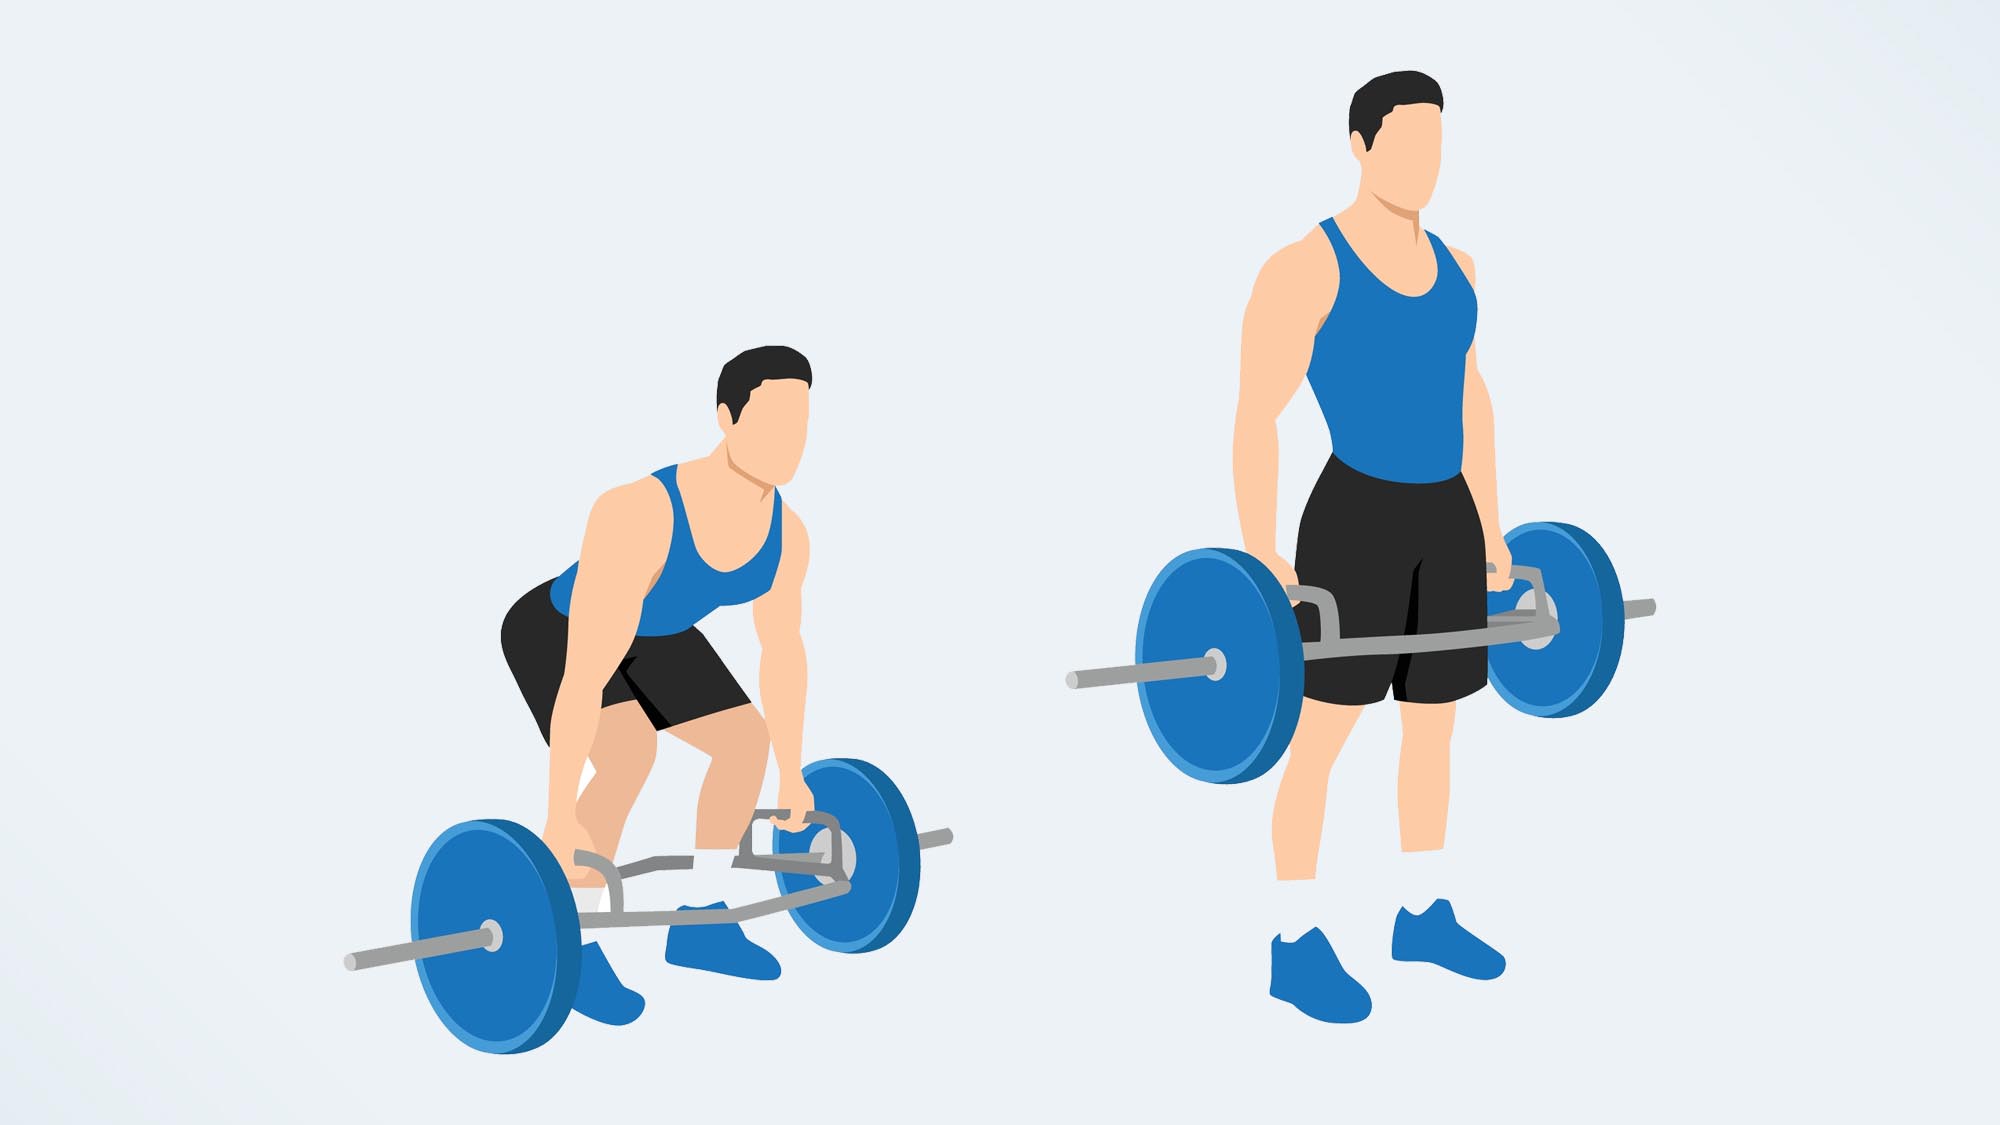 Just two dumbbells and five moves are all you need for this quick